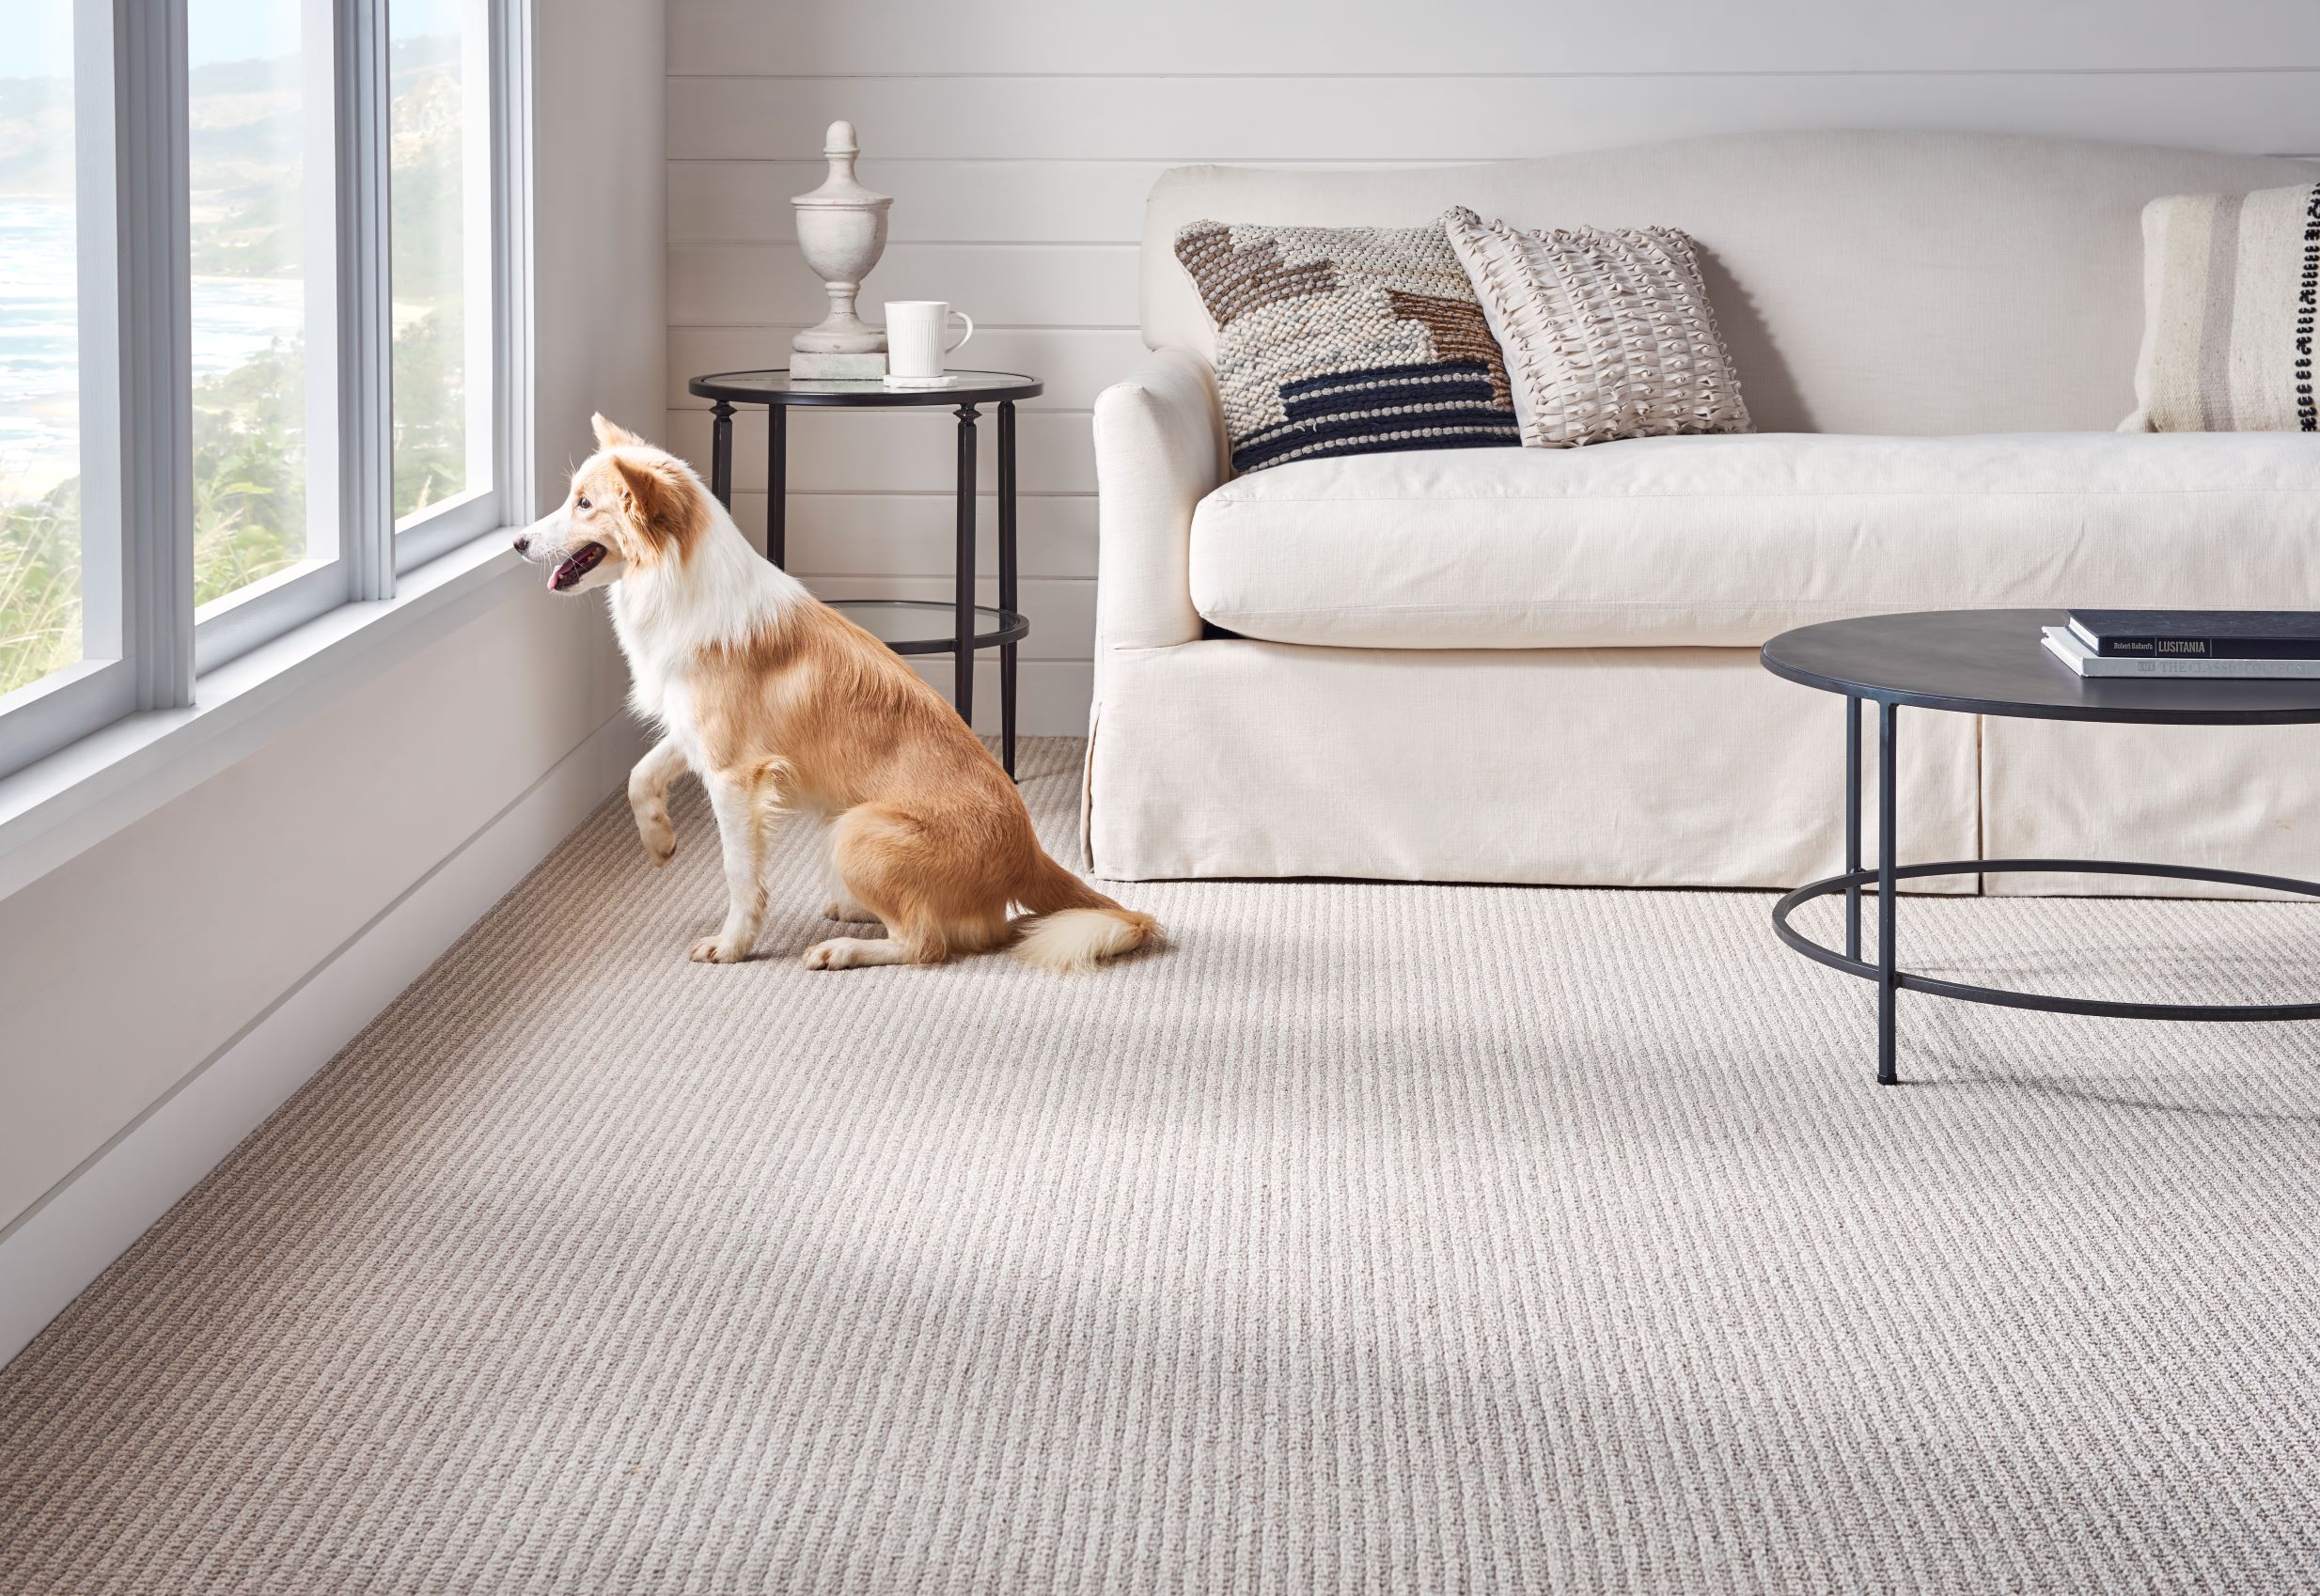 What To Consider When Choosing Carpets for Homes With Pets?